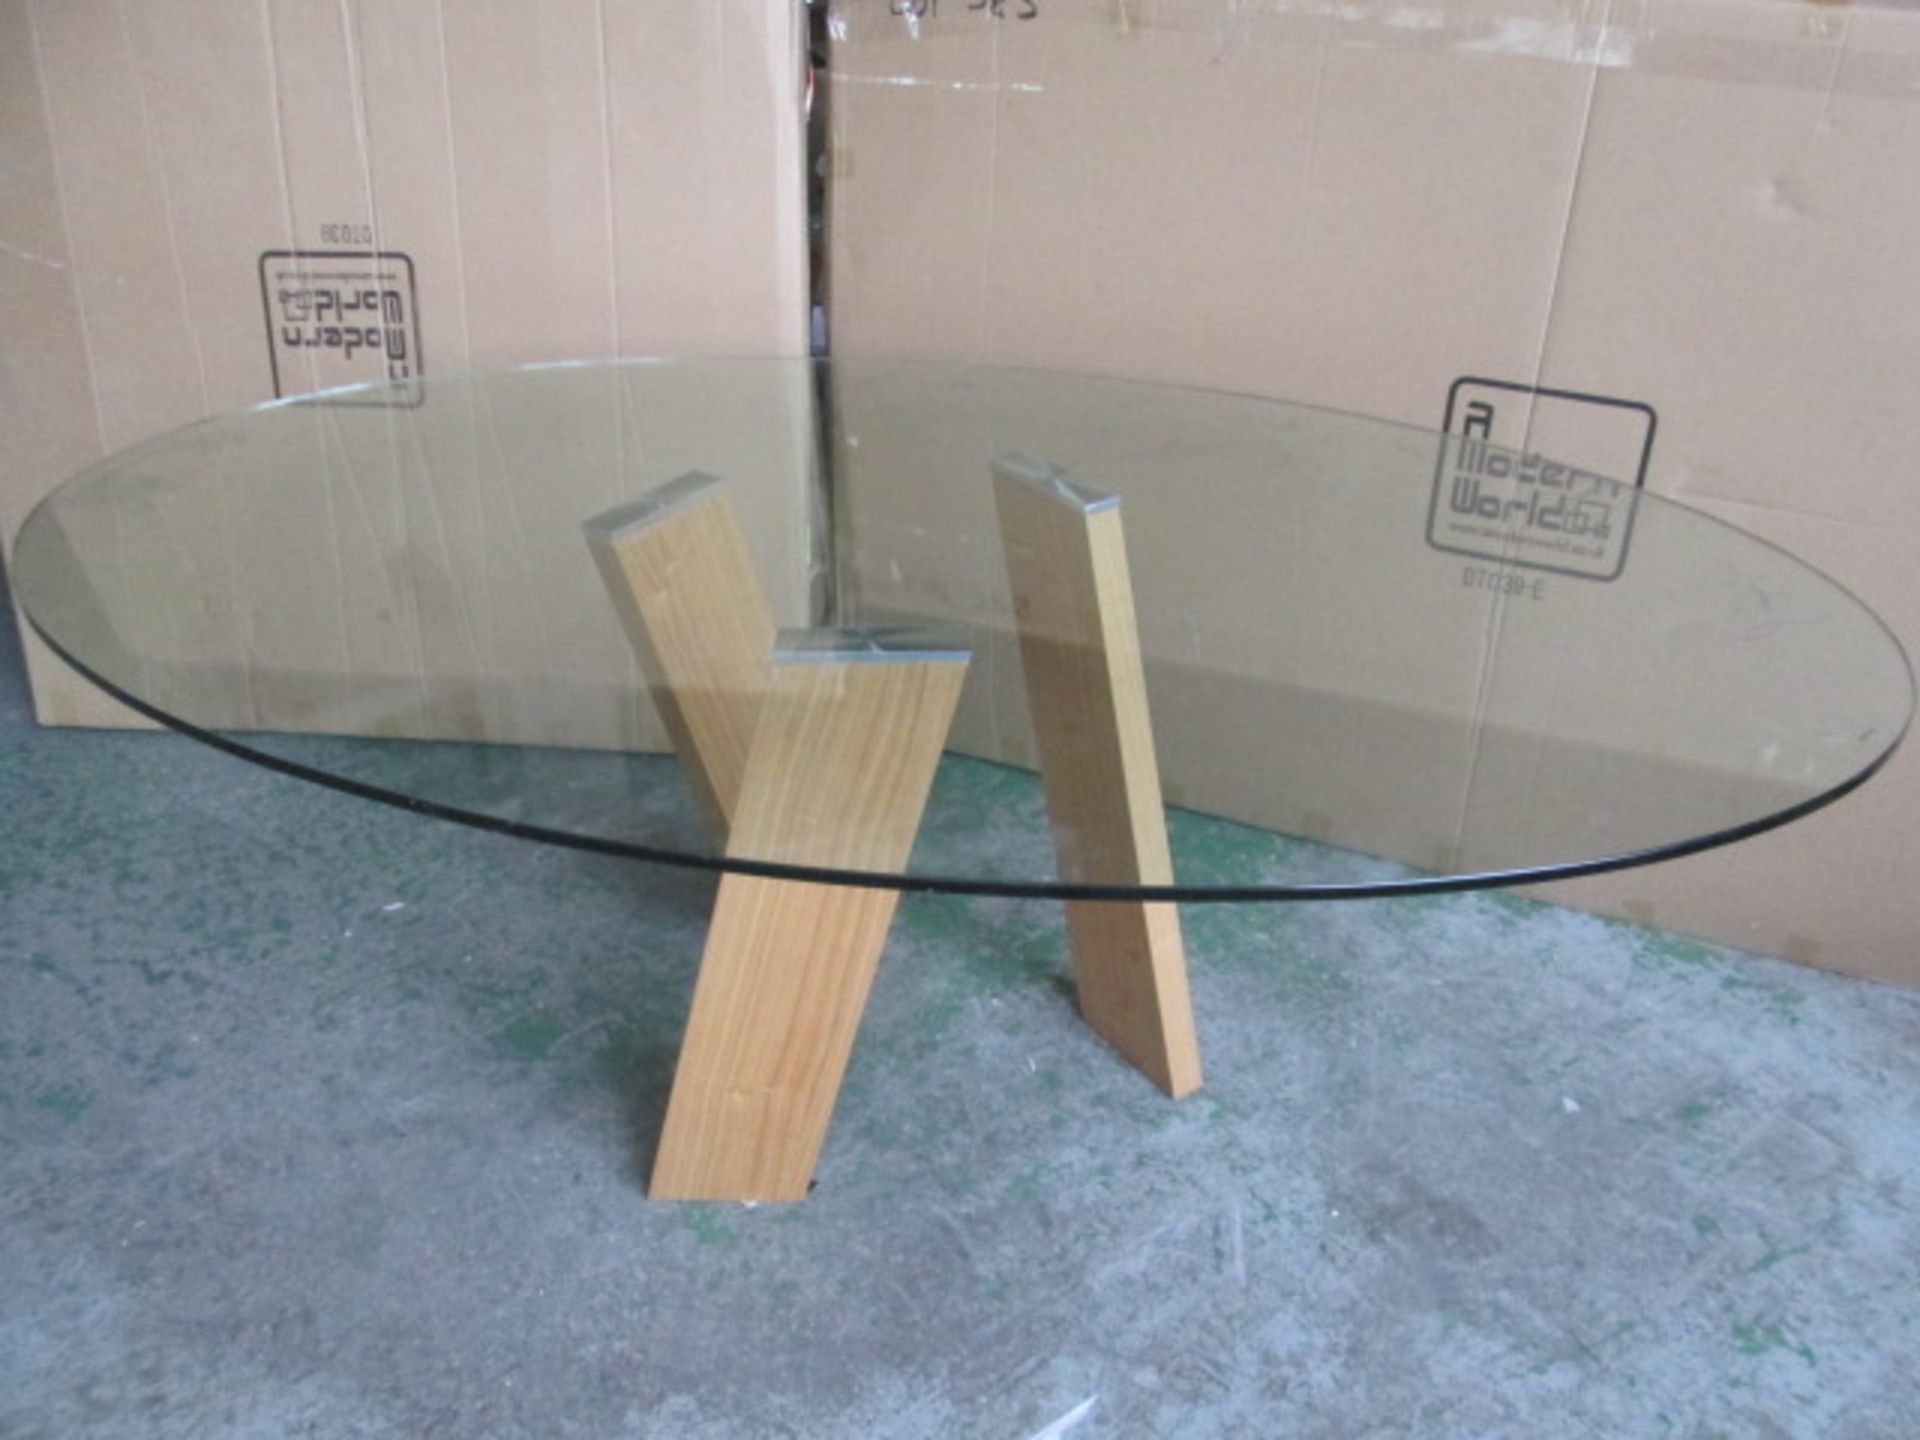 Boxed/As New: Levitat Dining Table with Wood Legs & Glass Oval Top. Size (H) 75cm x (W) 204 x (D)